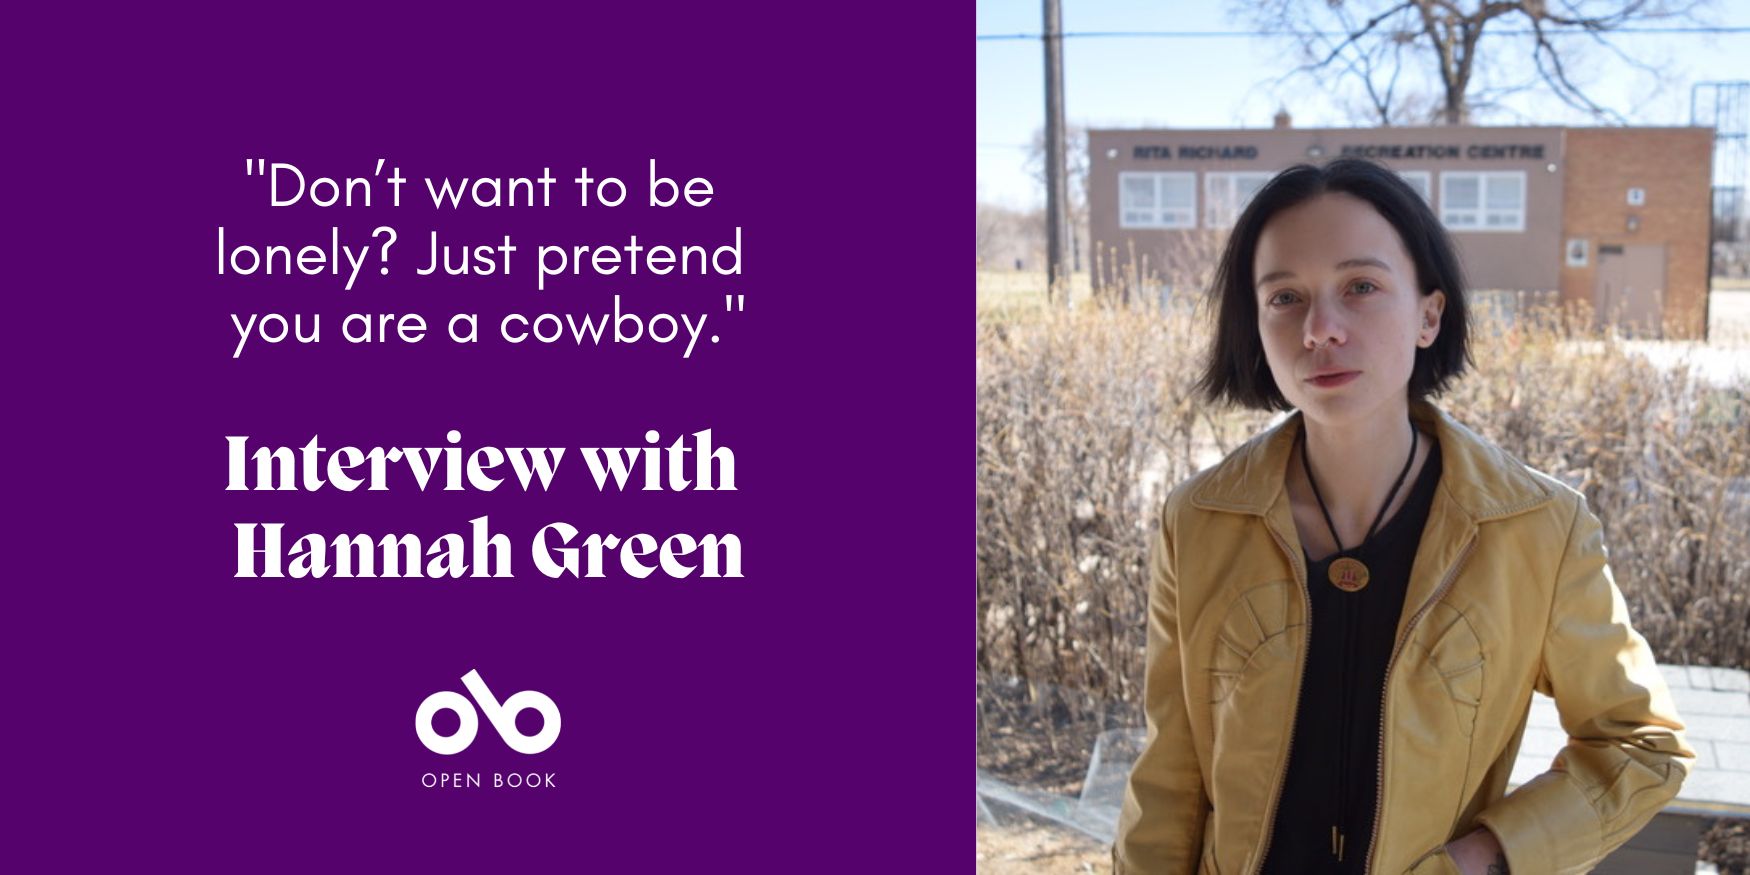 purple banner with white text reading "Don't want to be lonely? Just pretend you are a cowboy. Interview with Hannah Green." Photo of poet Hannah Green on the right.